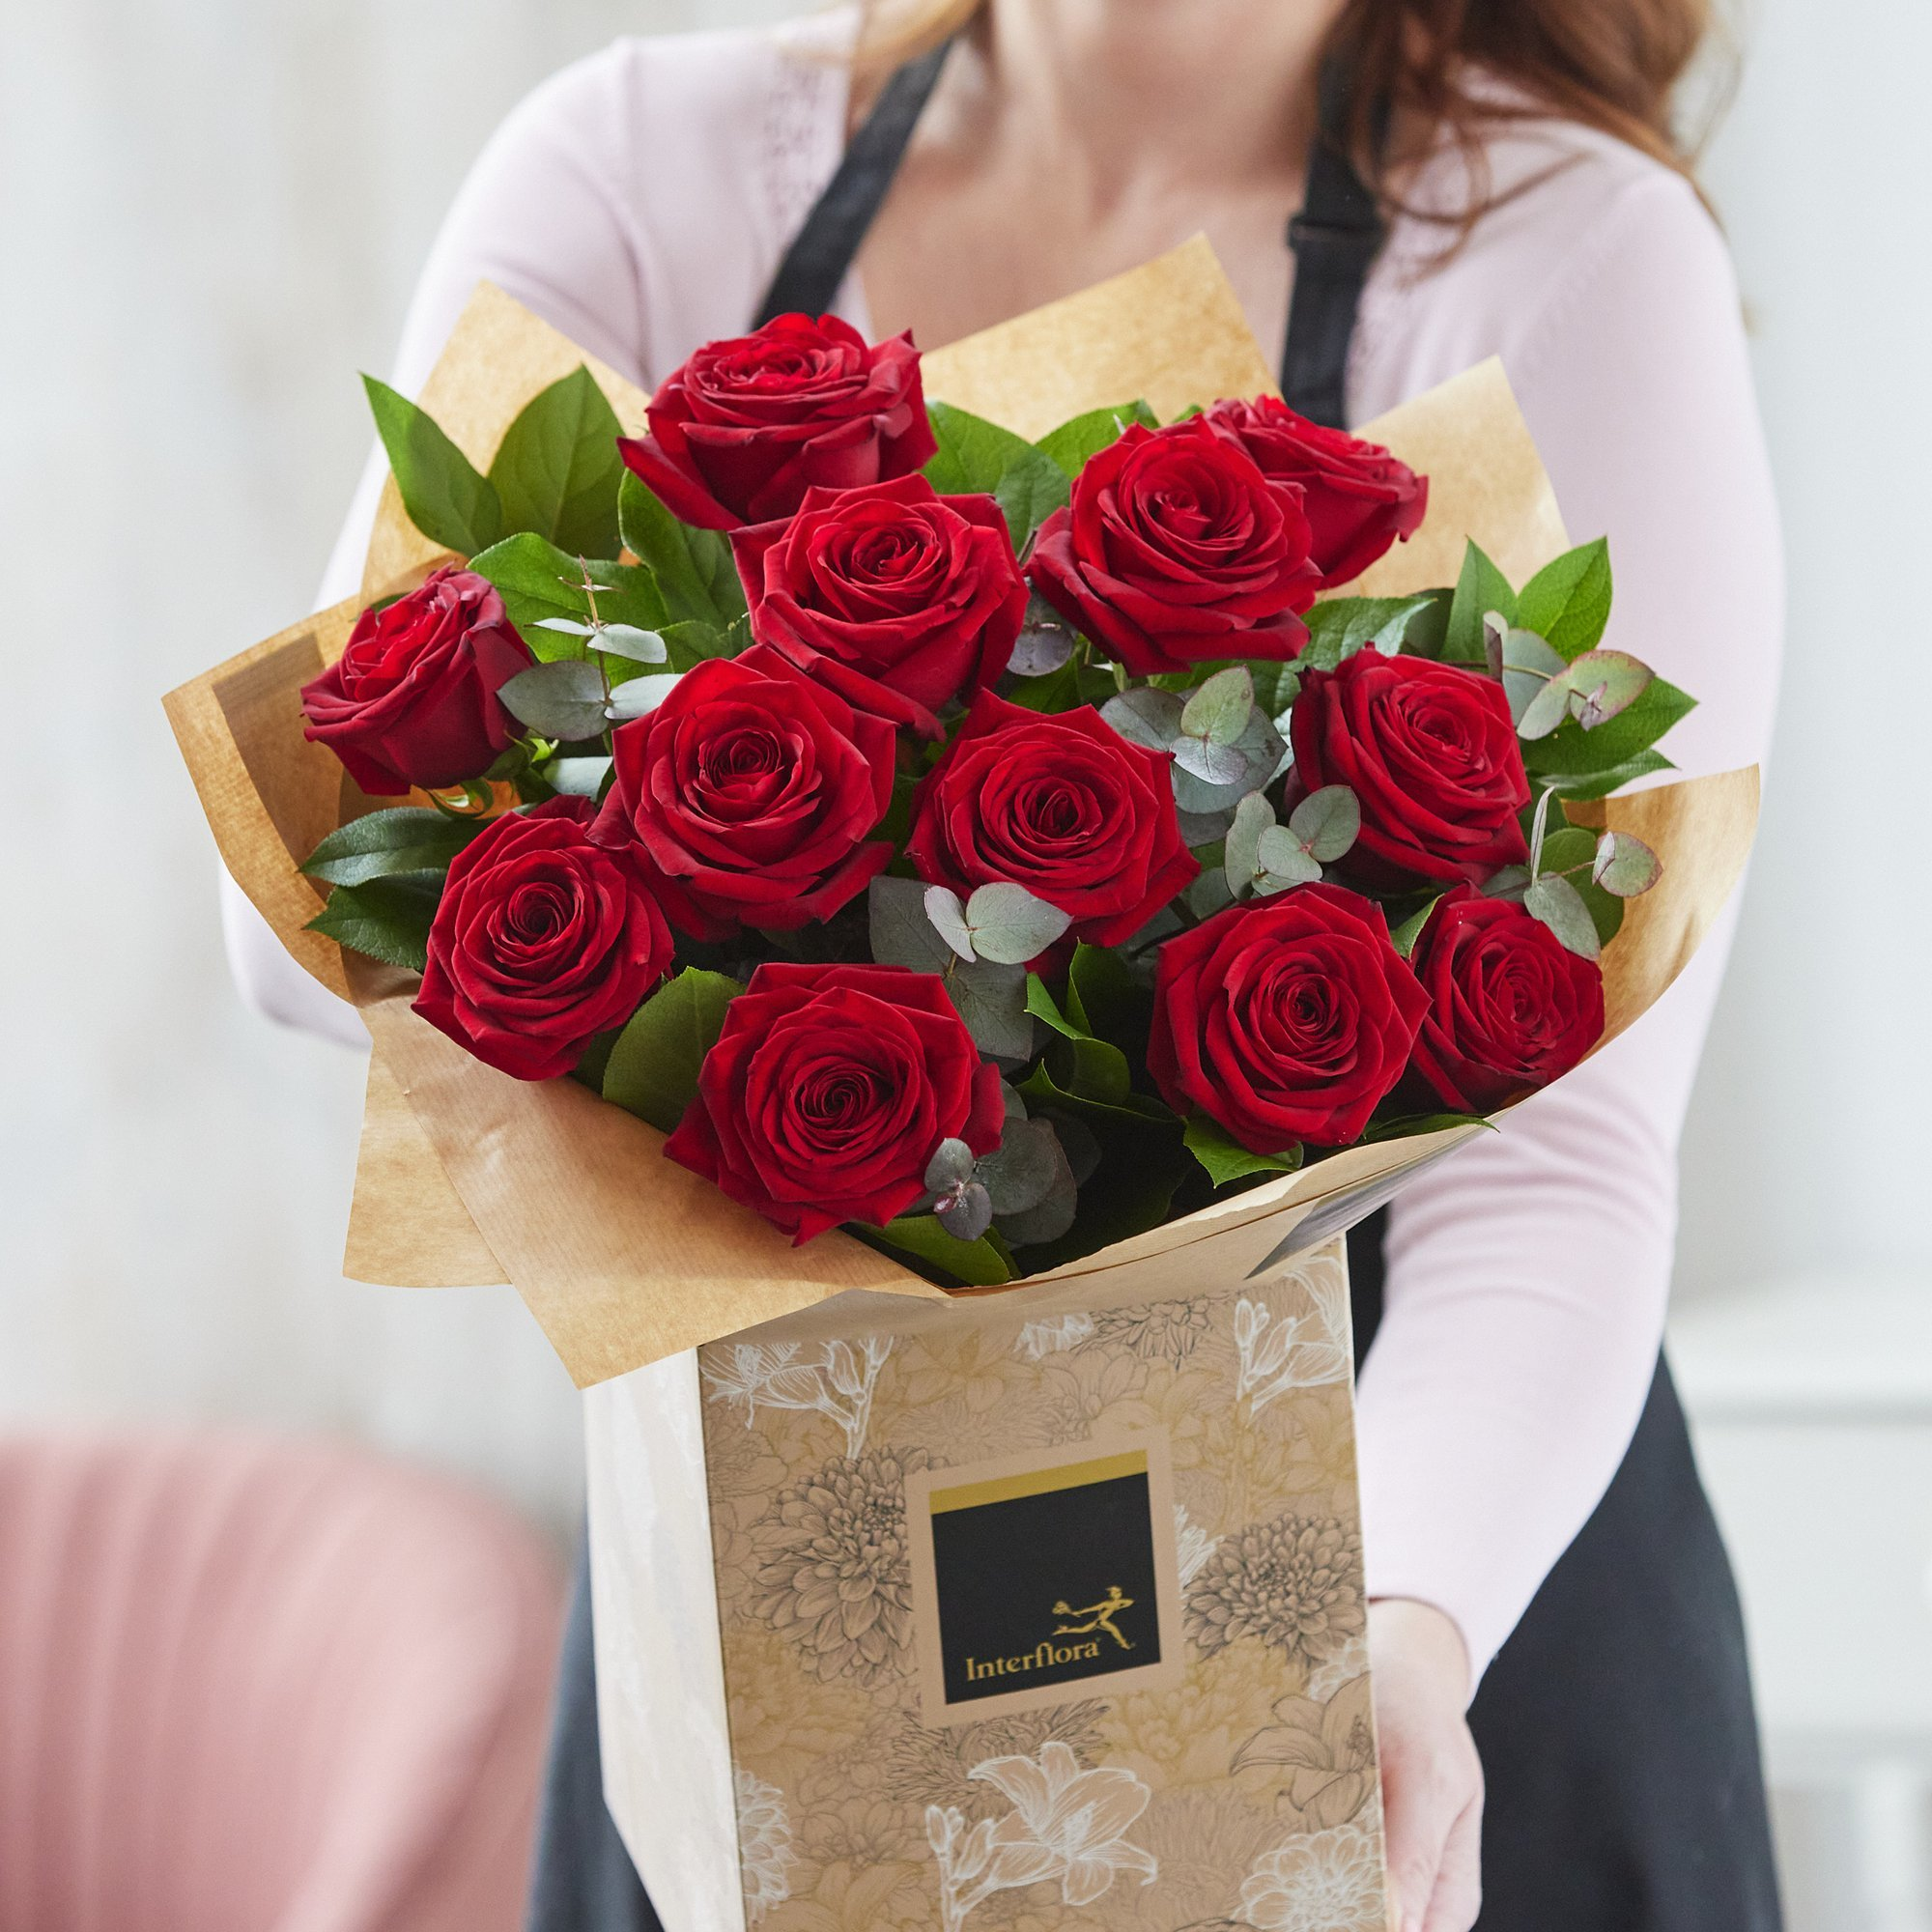 Roses - Facts Types and Care Tips | Interflora